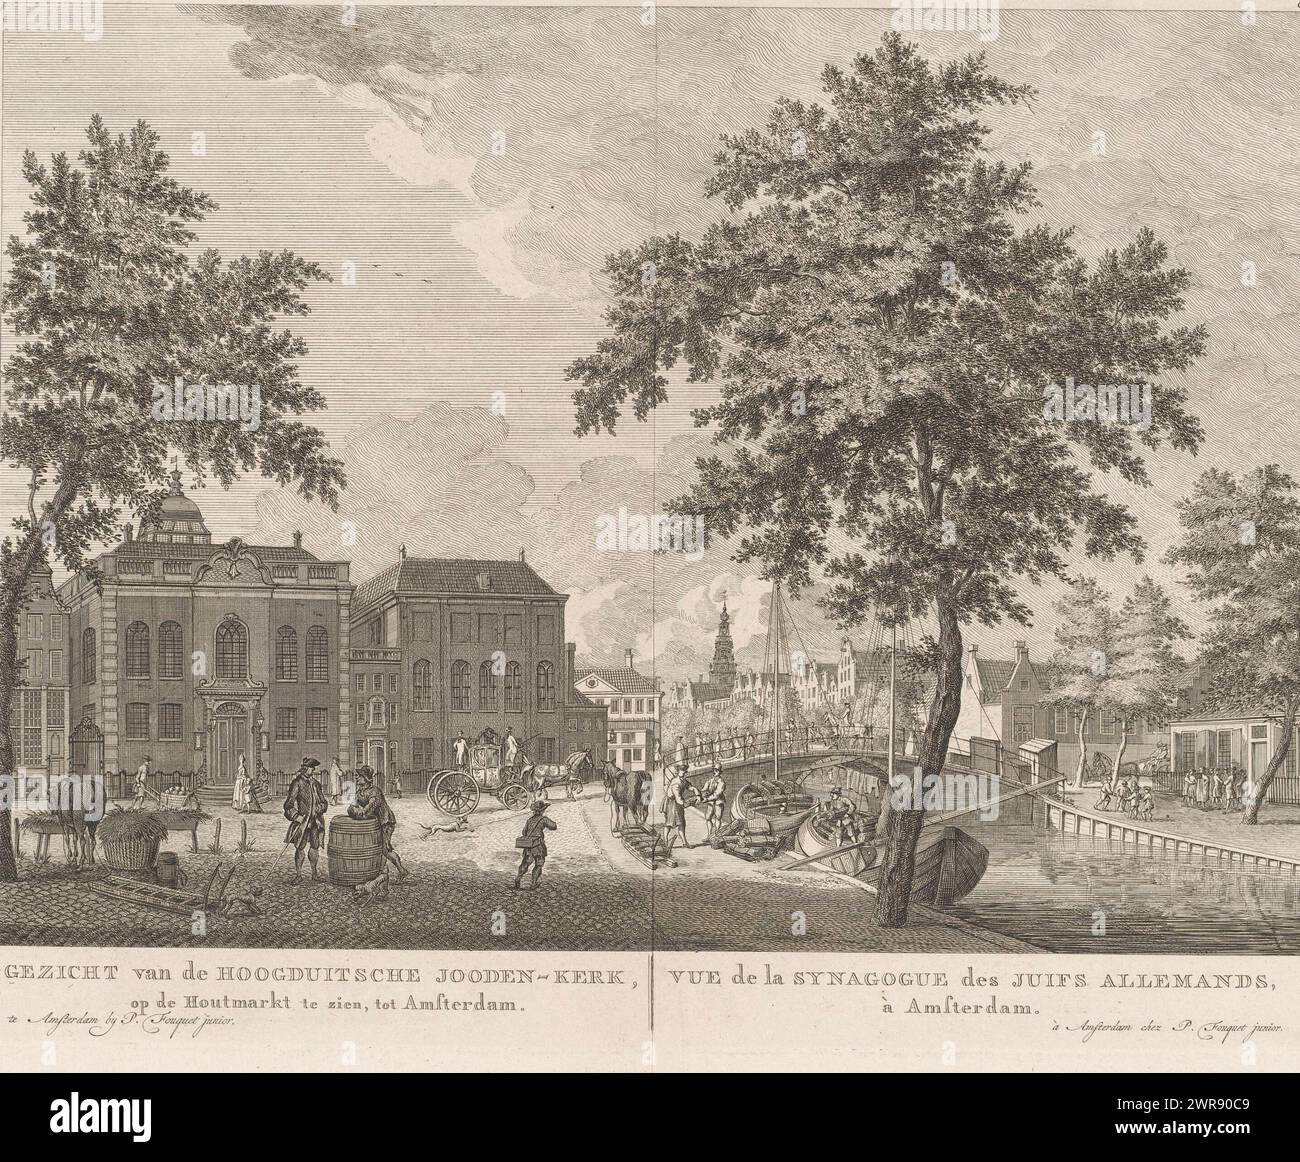 View of the New and Great Synagogue in Amsterdam, View of the High German Jewish Church, to be seen on the Houtmarkt, to Amsterdam / Vue de la Synagogue des Juifs Allemands, à Amsterdam (title on object), View of the New Synagogue (left ) and Great Synagogue (right) of the High German community on the Deventer Houtmarkt, the current Jonas Daniël Meijerplein, in Amsterdam. Below the performance the title in Dutch and French. Numbered top right: 63., print maker: Caspar Jacobsz. Philips, (possibly), after drawing by: Jan de Vlaming, (possibly ), publisher: Pierre Fouquet, Amsterdam Stock Photo